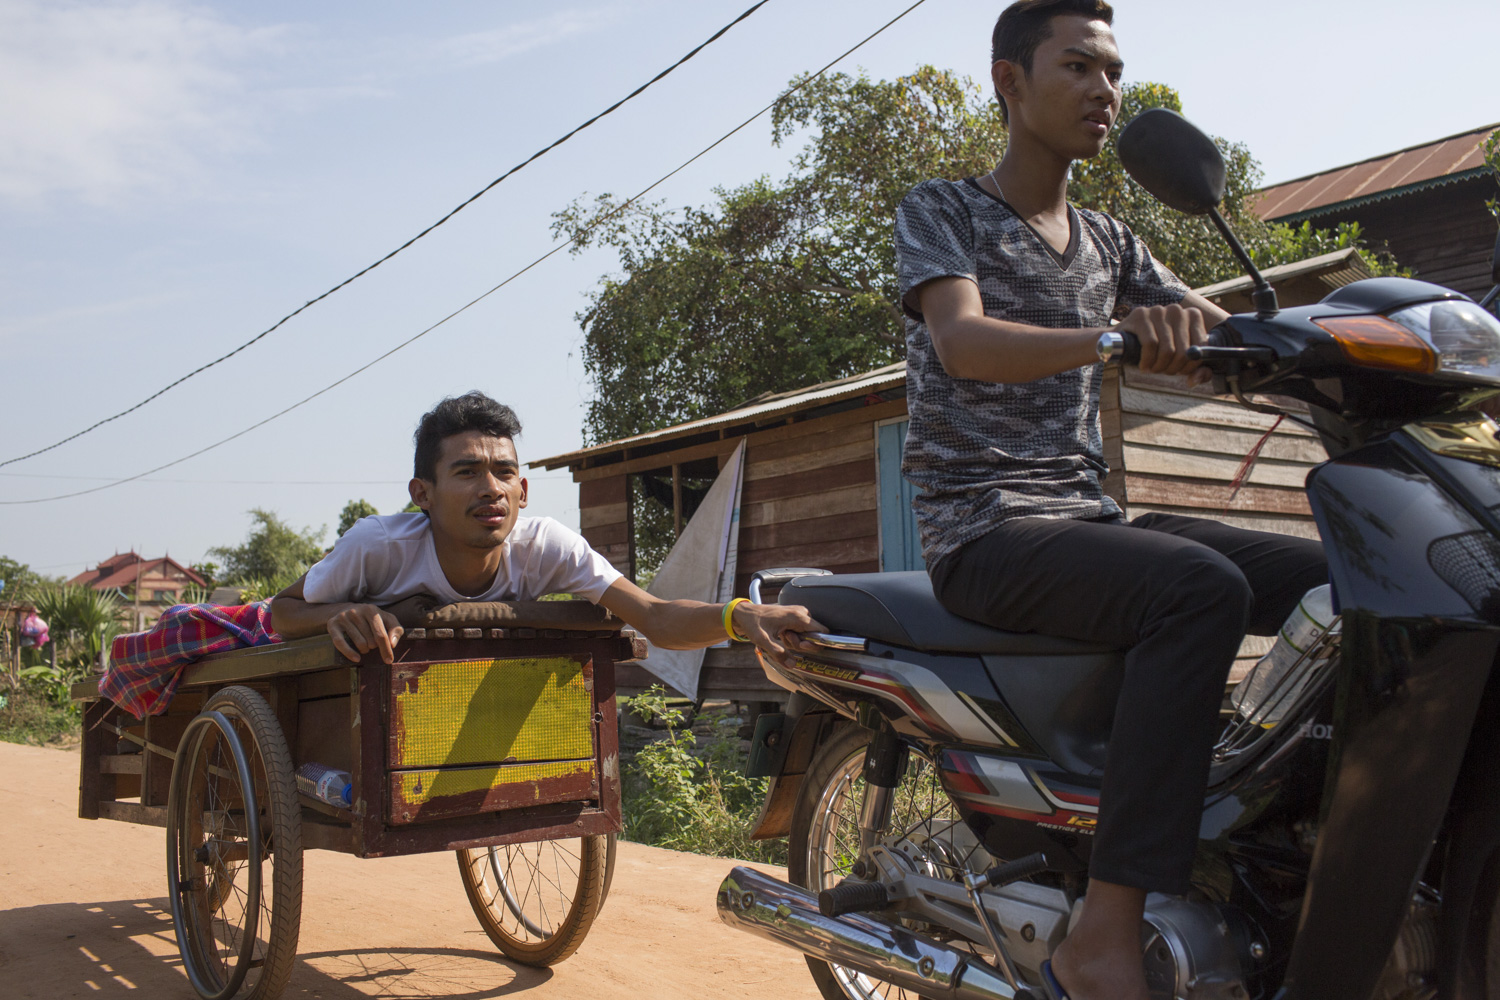 Sophanna now lives with his close friend, Davit, whom he sees as his brother. Davit cares for him daily, and chauffeurs him around with his motorbike wherever he needs.